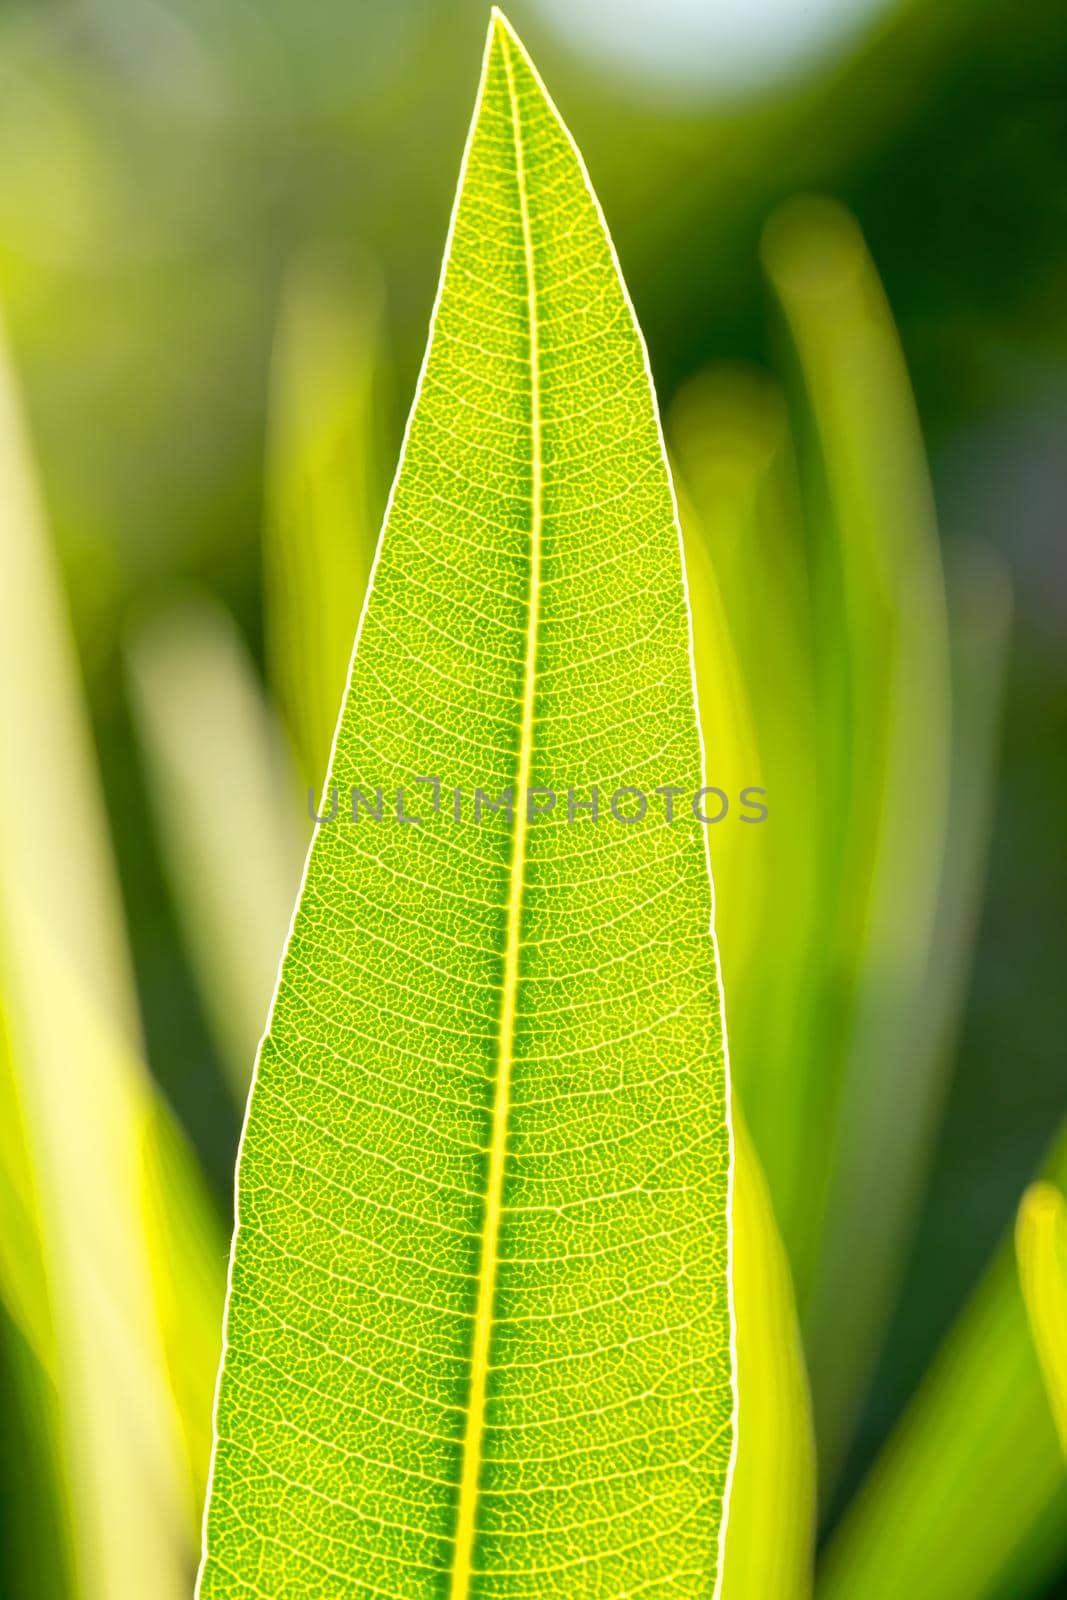 Texture abstract background of fresh green leaf with sun back light. Macro image beautiful vibrant pointy leaf foliage with blurry green background.